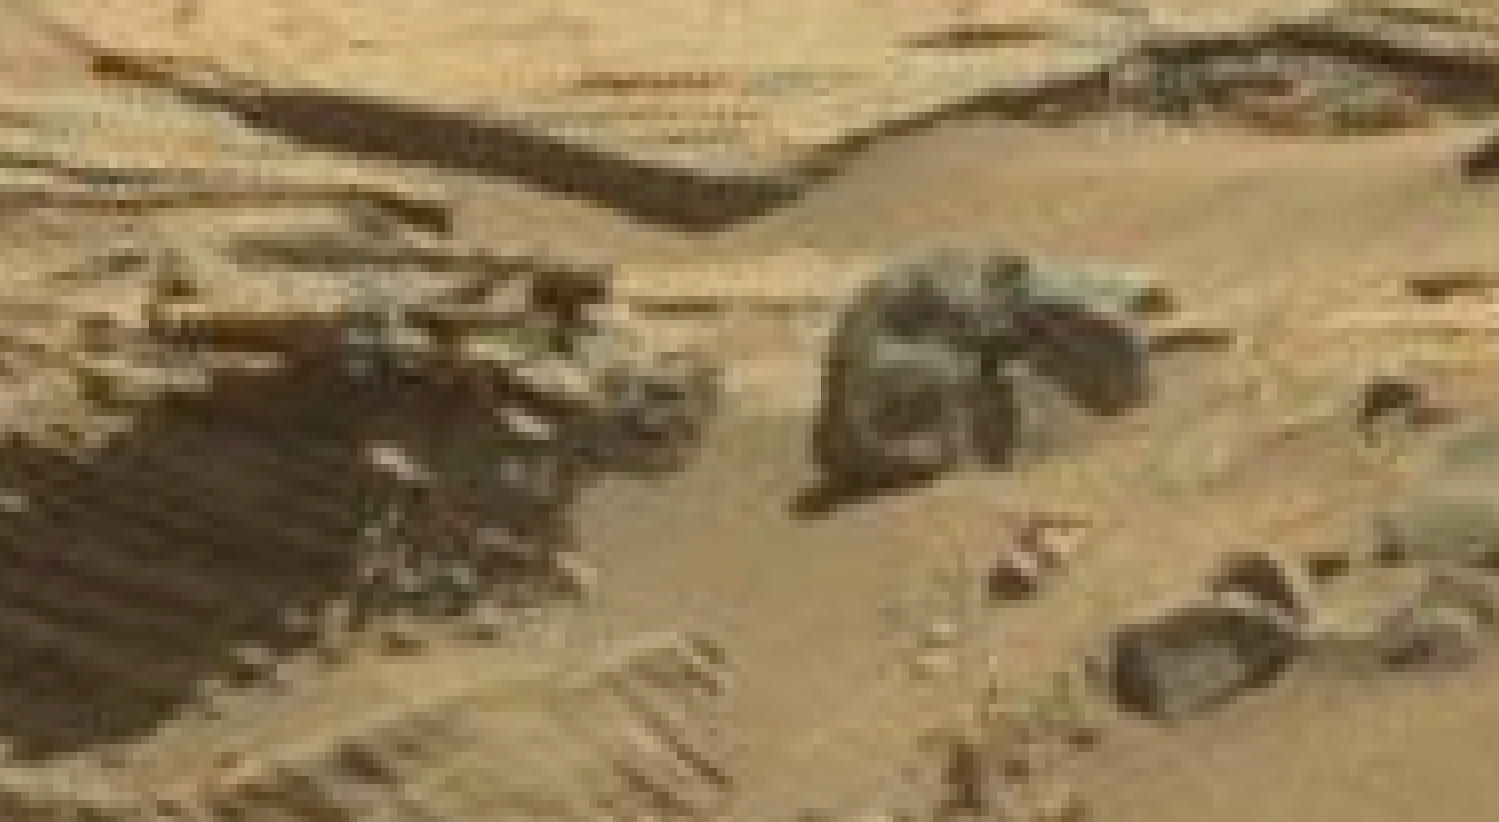 mars sol 1296 anomaly-artifacts 25 was life on mars